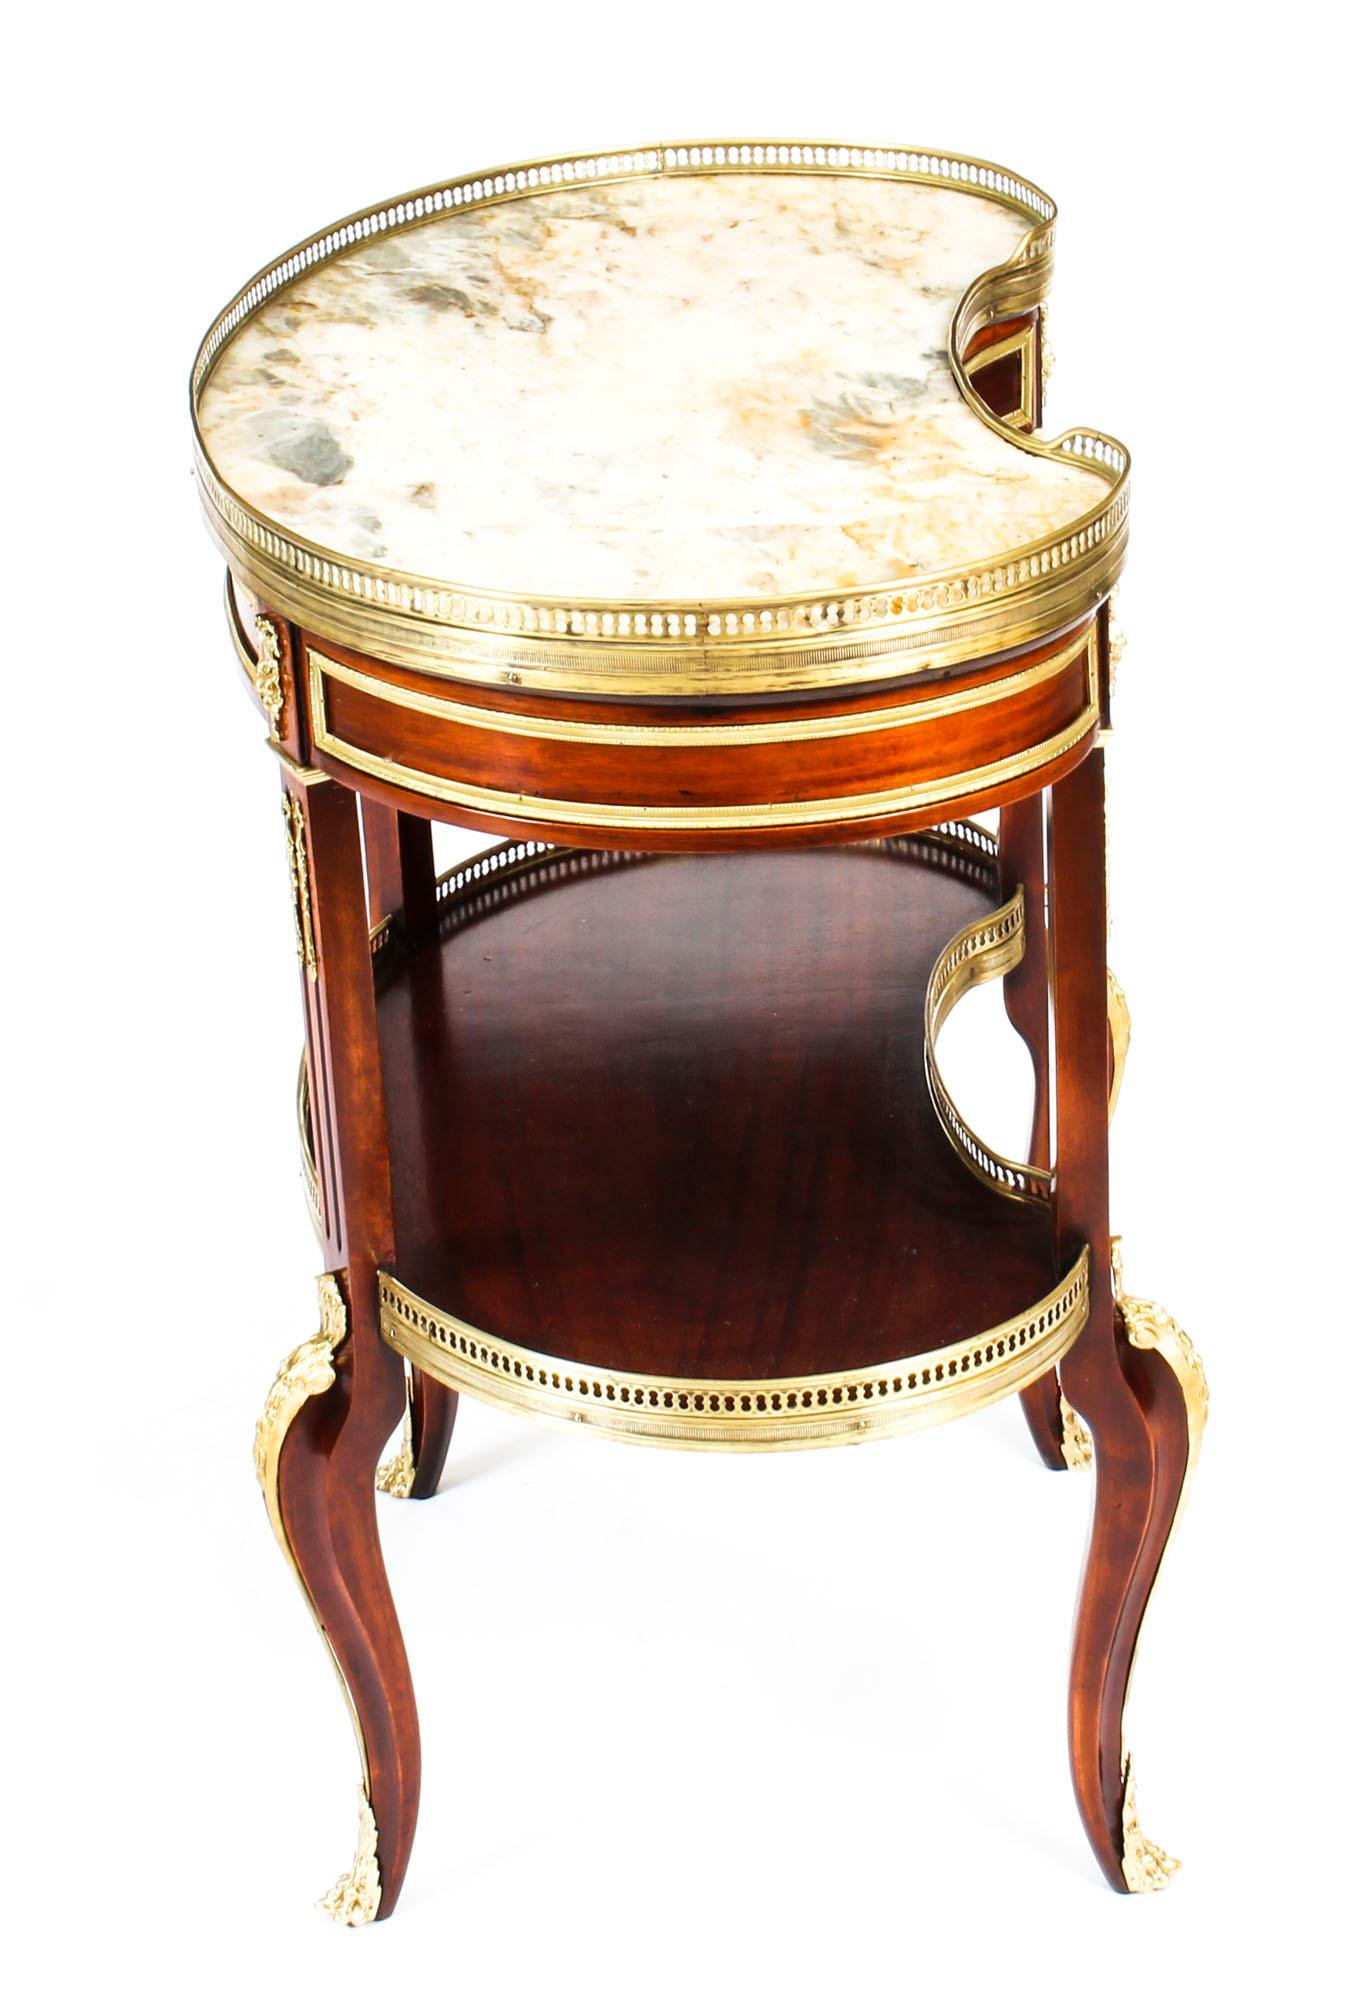 French Louis XVI Revival Kidney Shaped Marble-Top Side Table, 19th Century 3